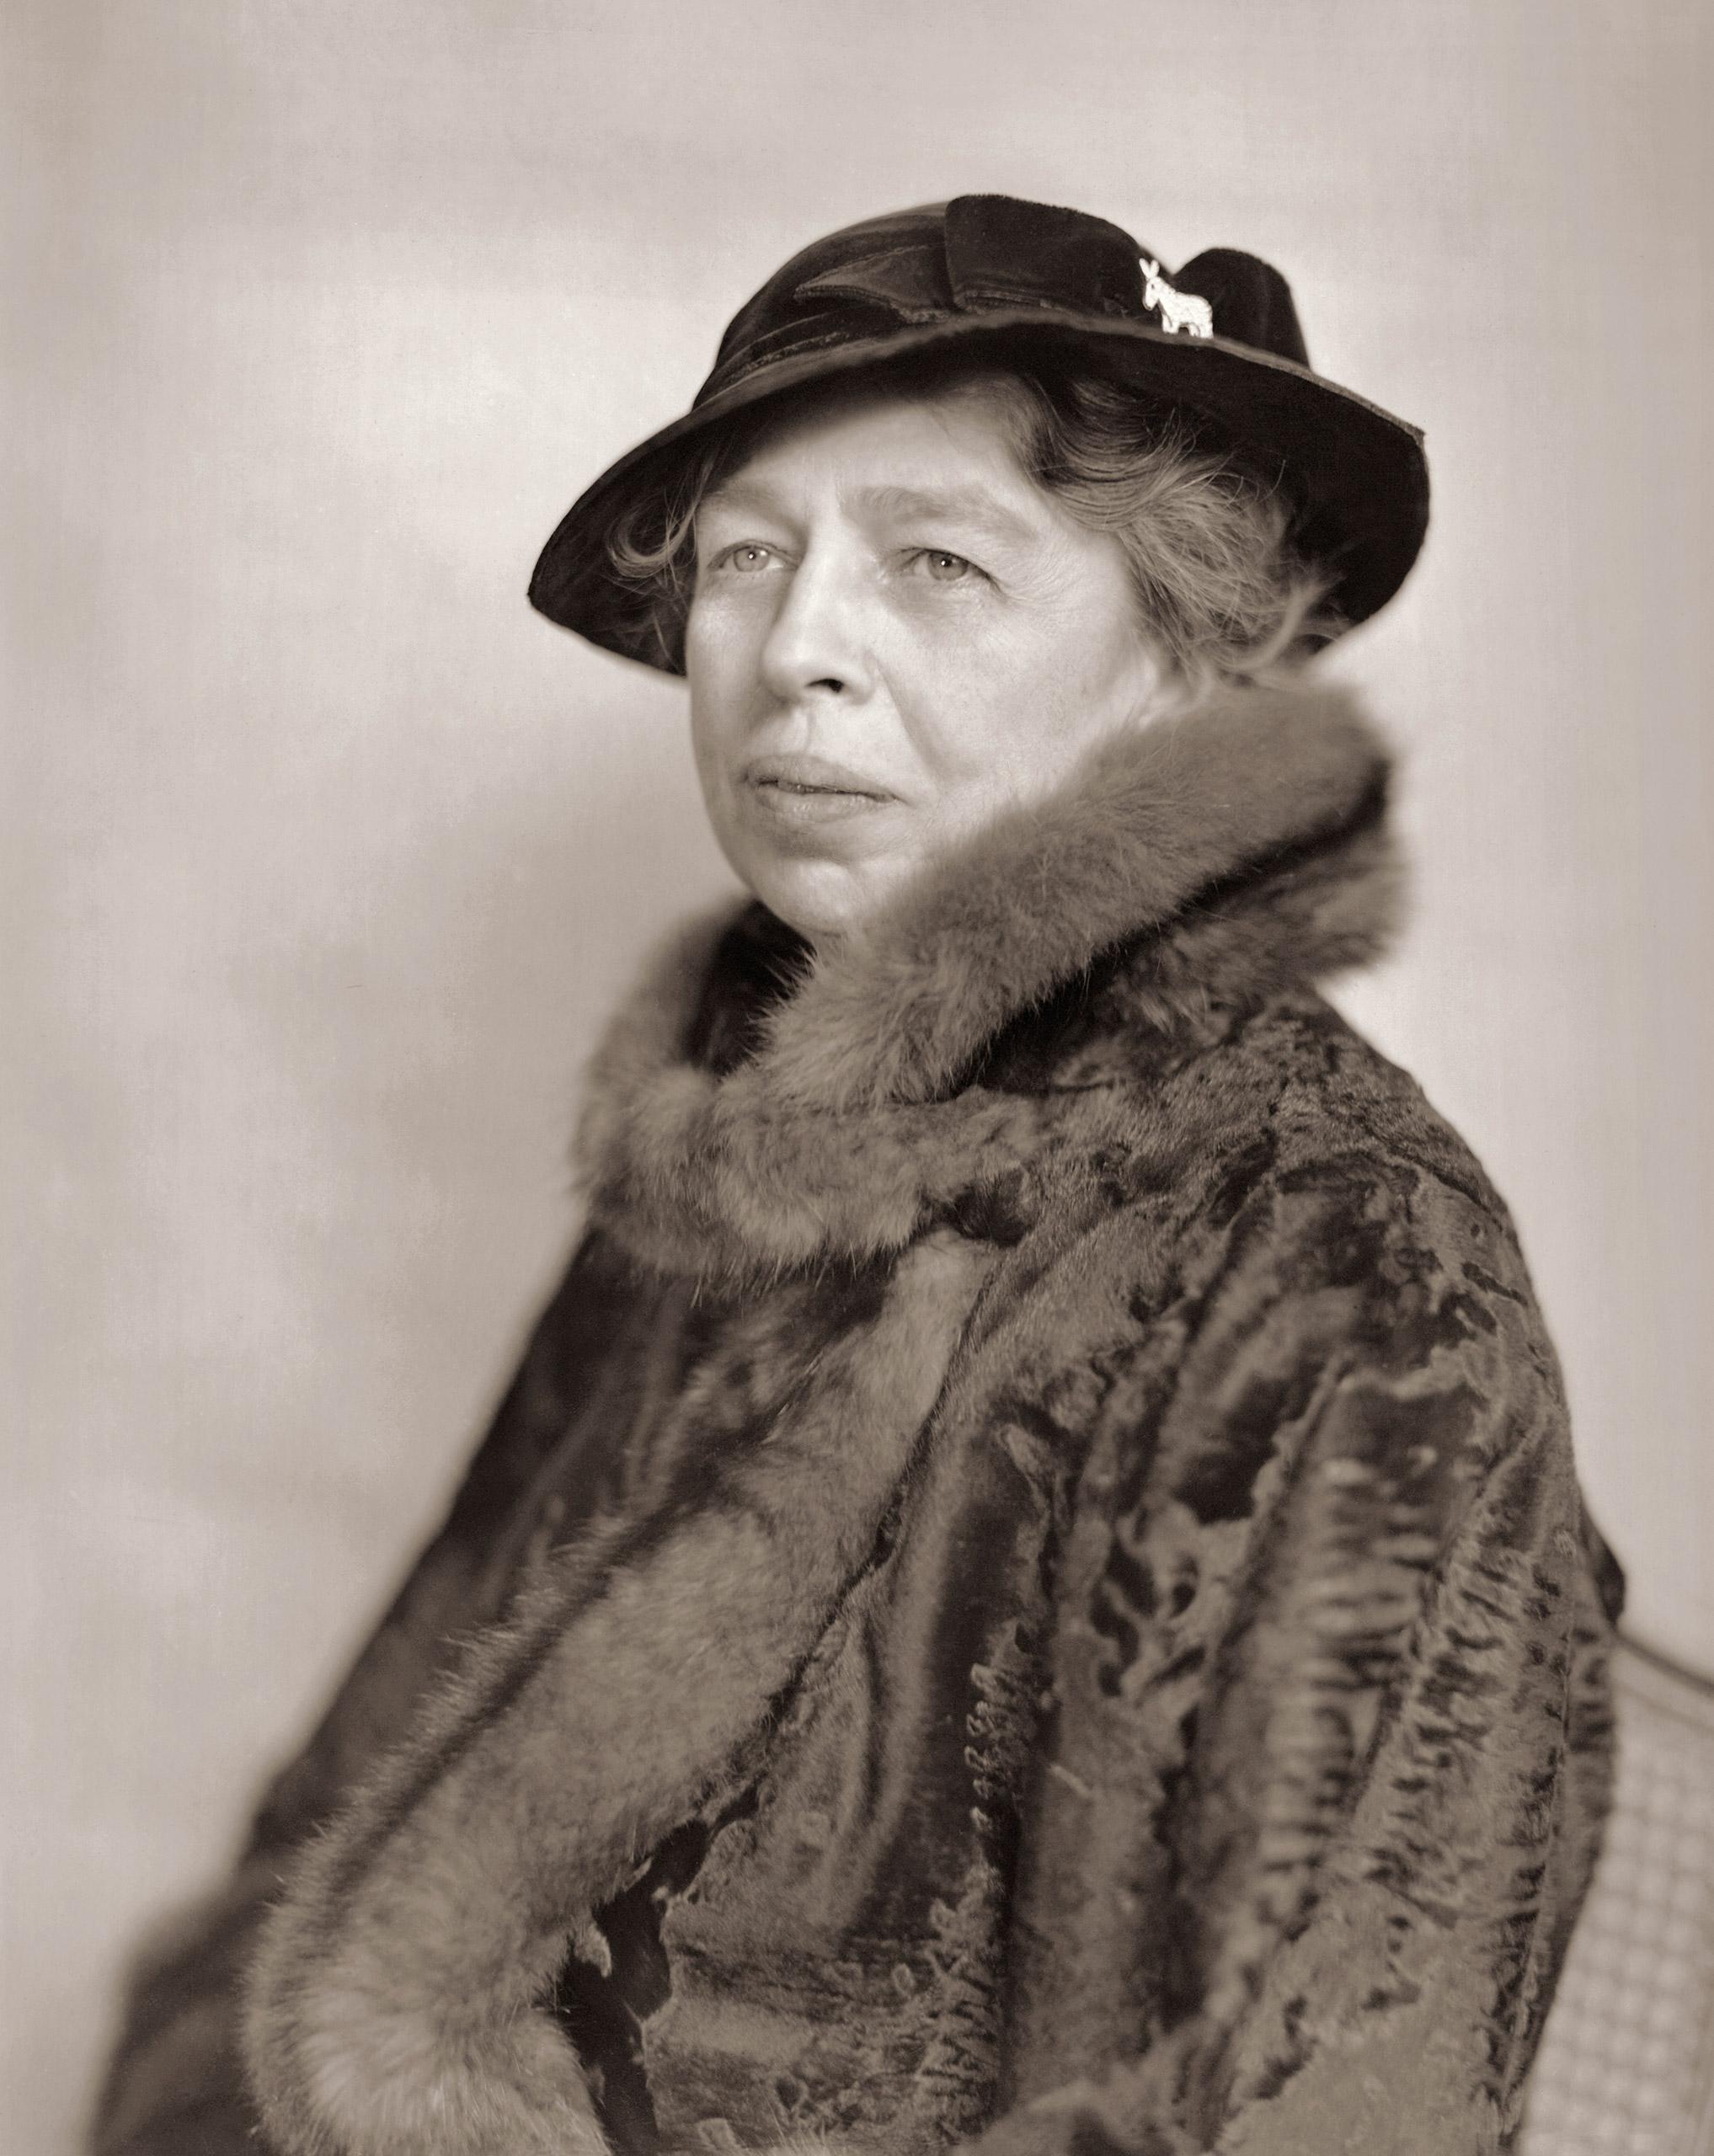 American diplomat and former First Lady Eleanor Roosevelt (1884 - 1962), circa early to mid 1940s.